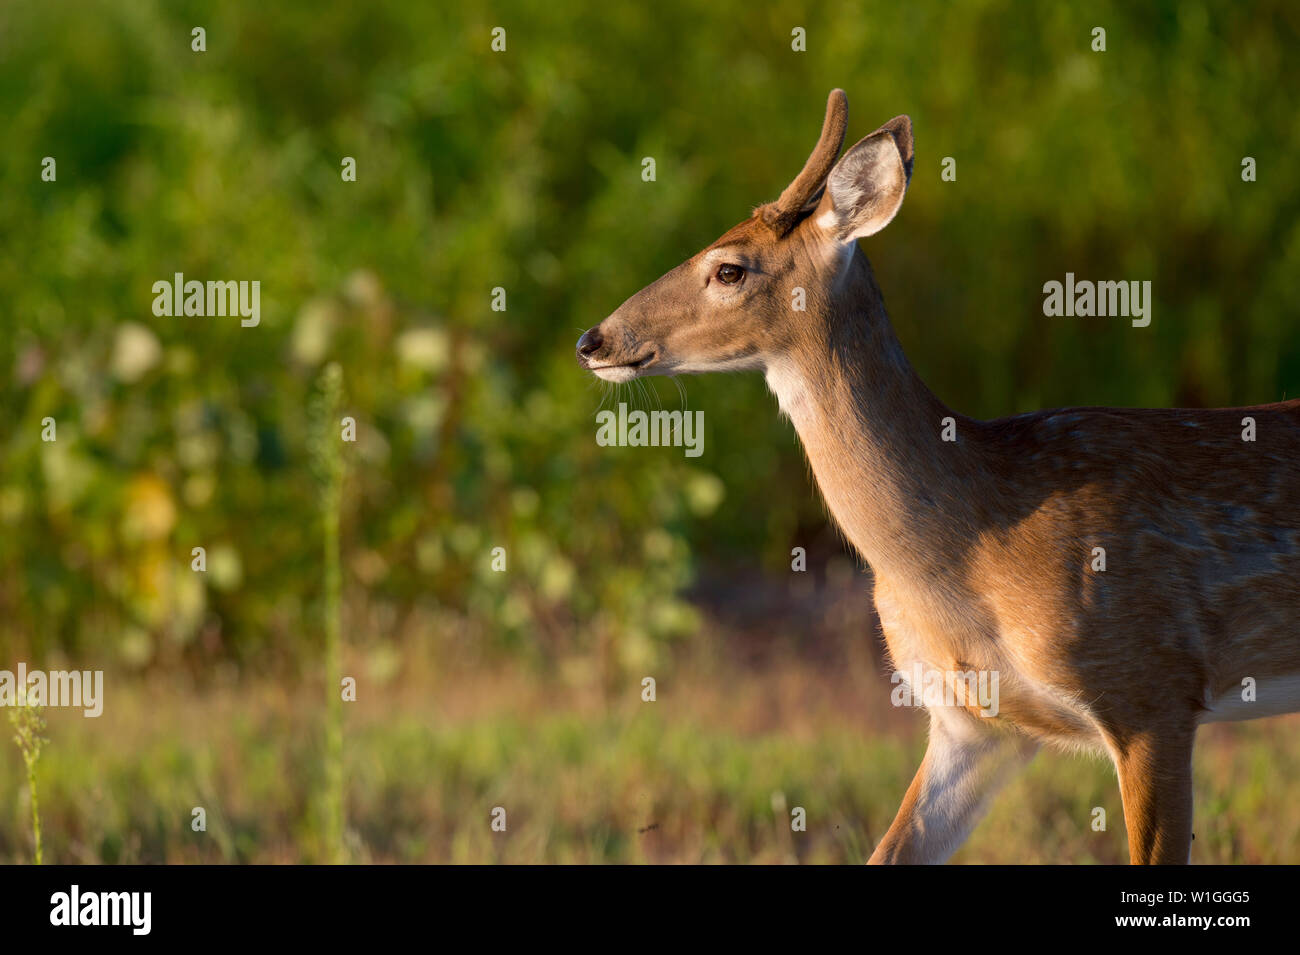 A young whitetail deer buck walks into the golden morning sunlight in an open field with its small antlers covered in velvet. Stock Photo